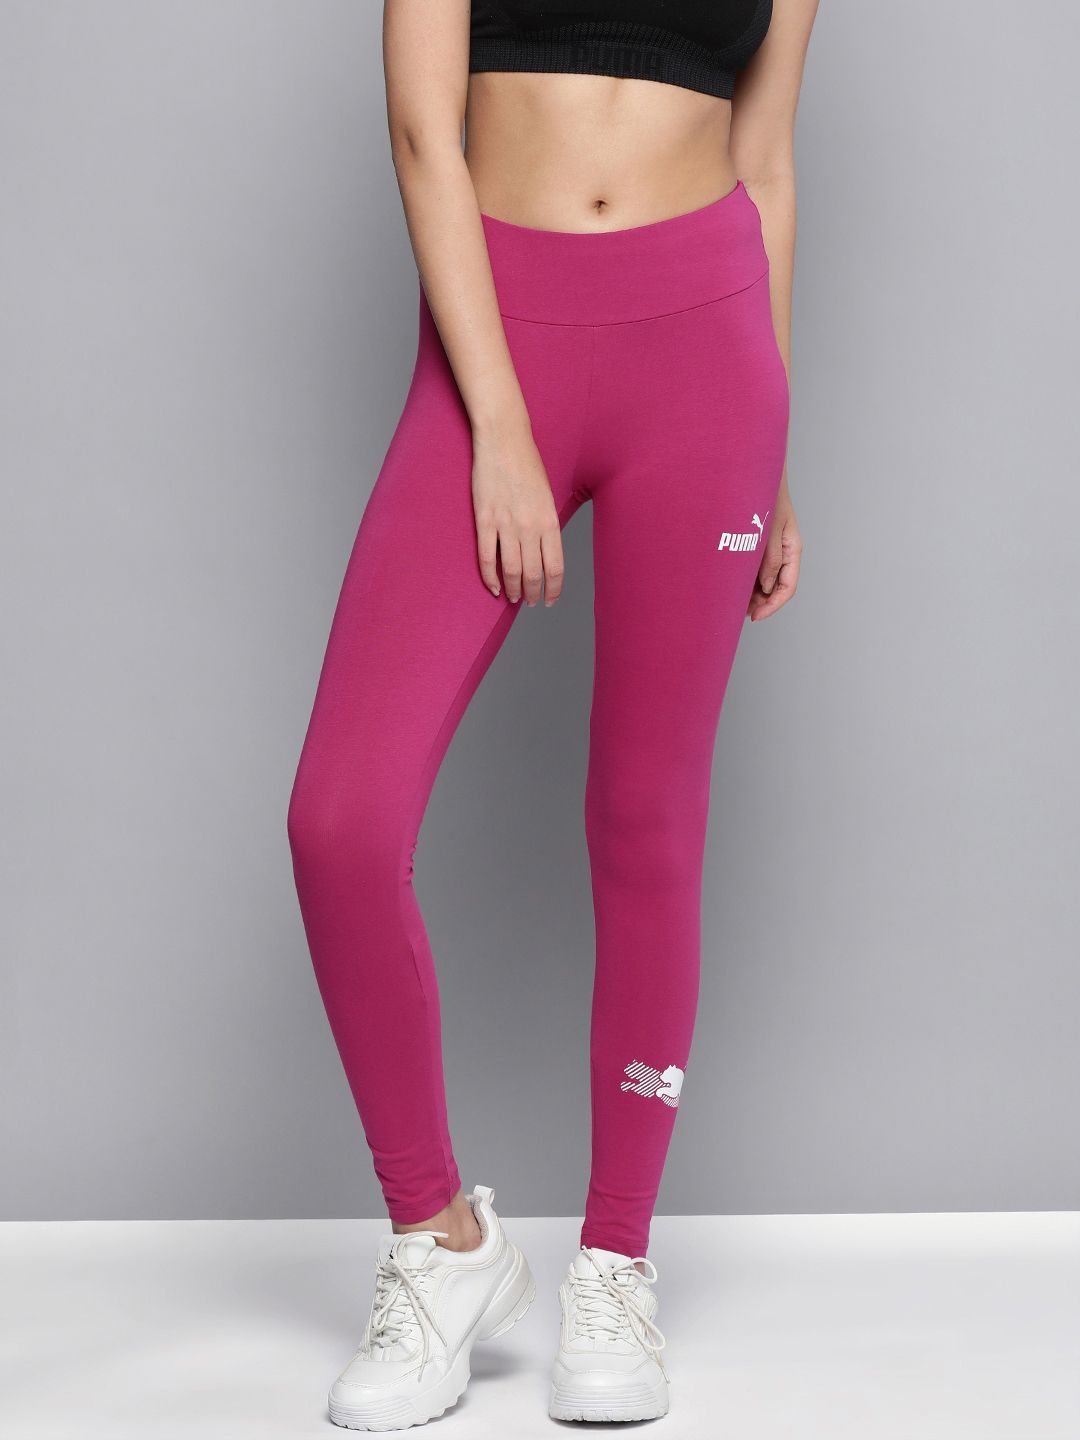 Puma Women Pink Power Tights with Printed Detail Price in India